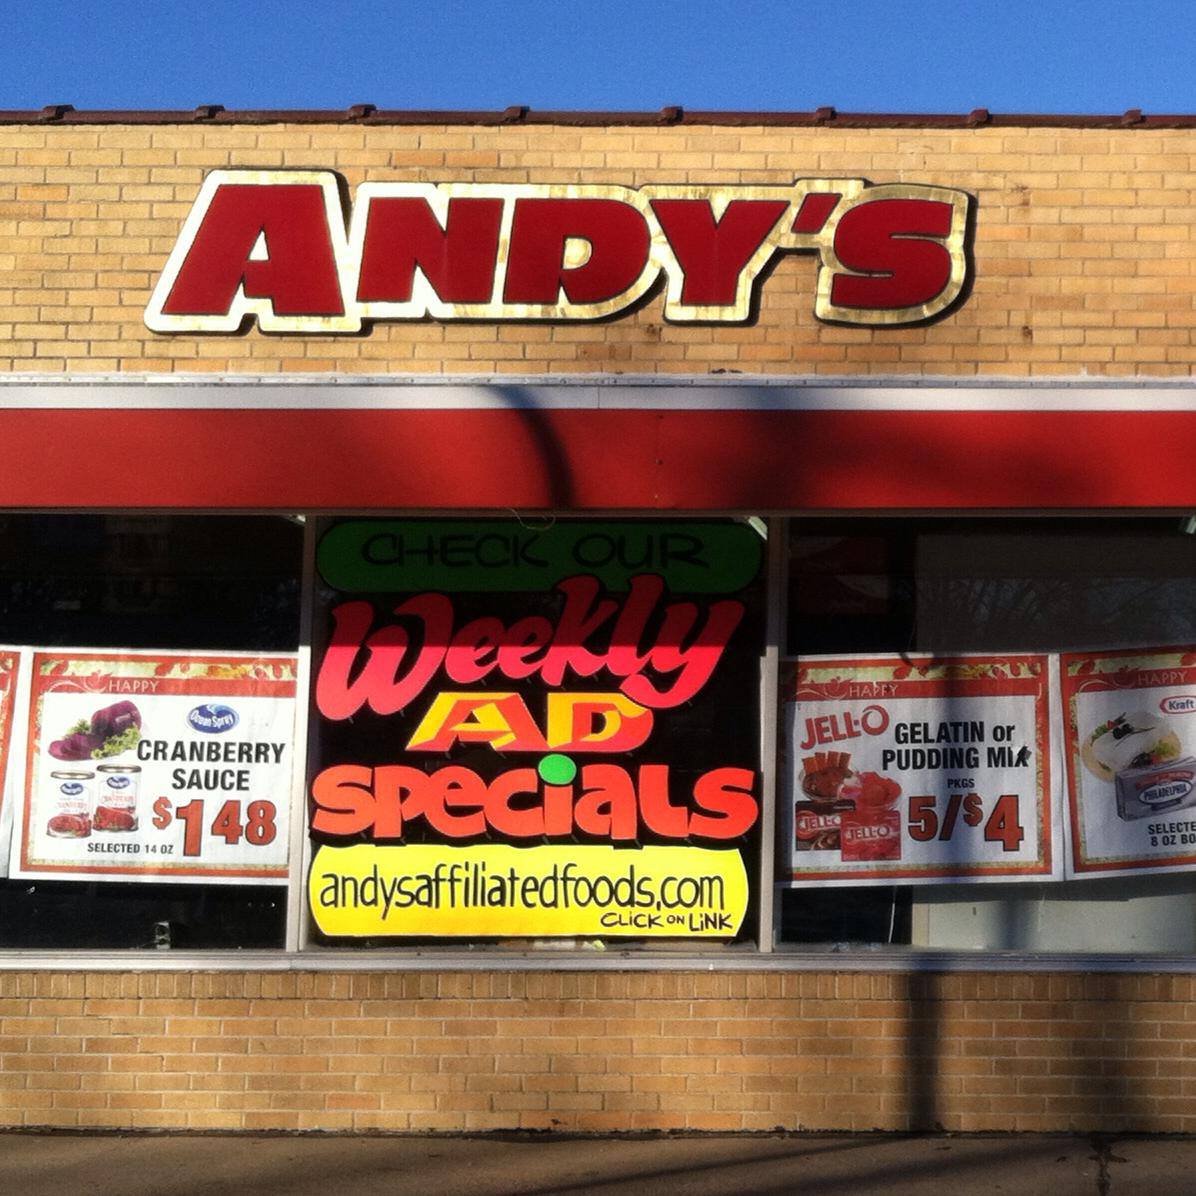 Company logo of Andy's Affiliated Foods